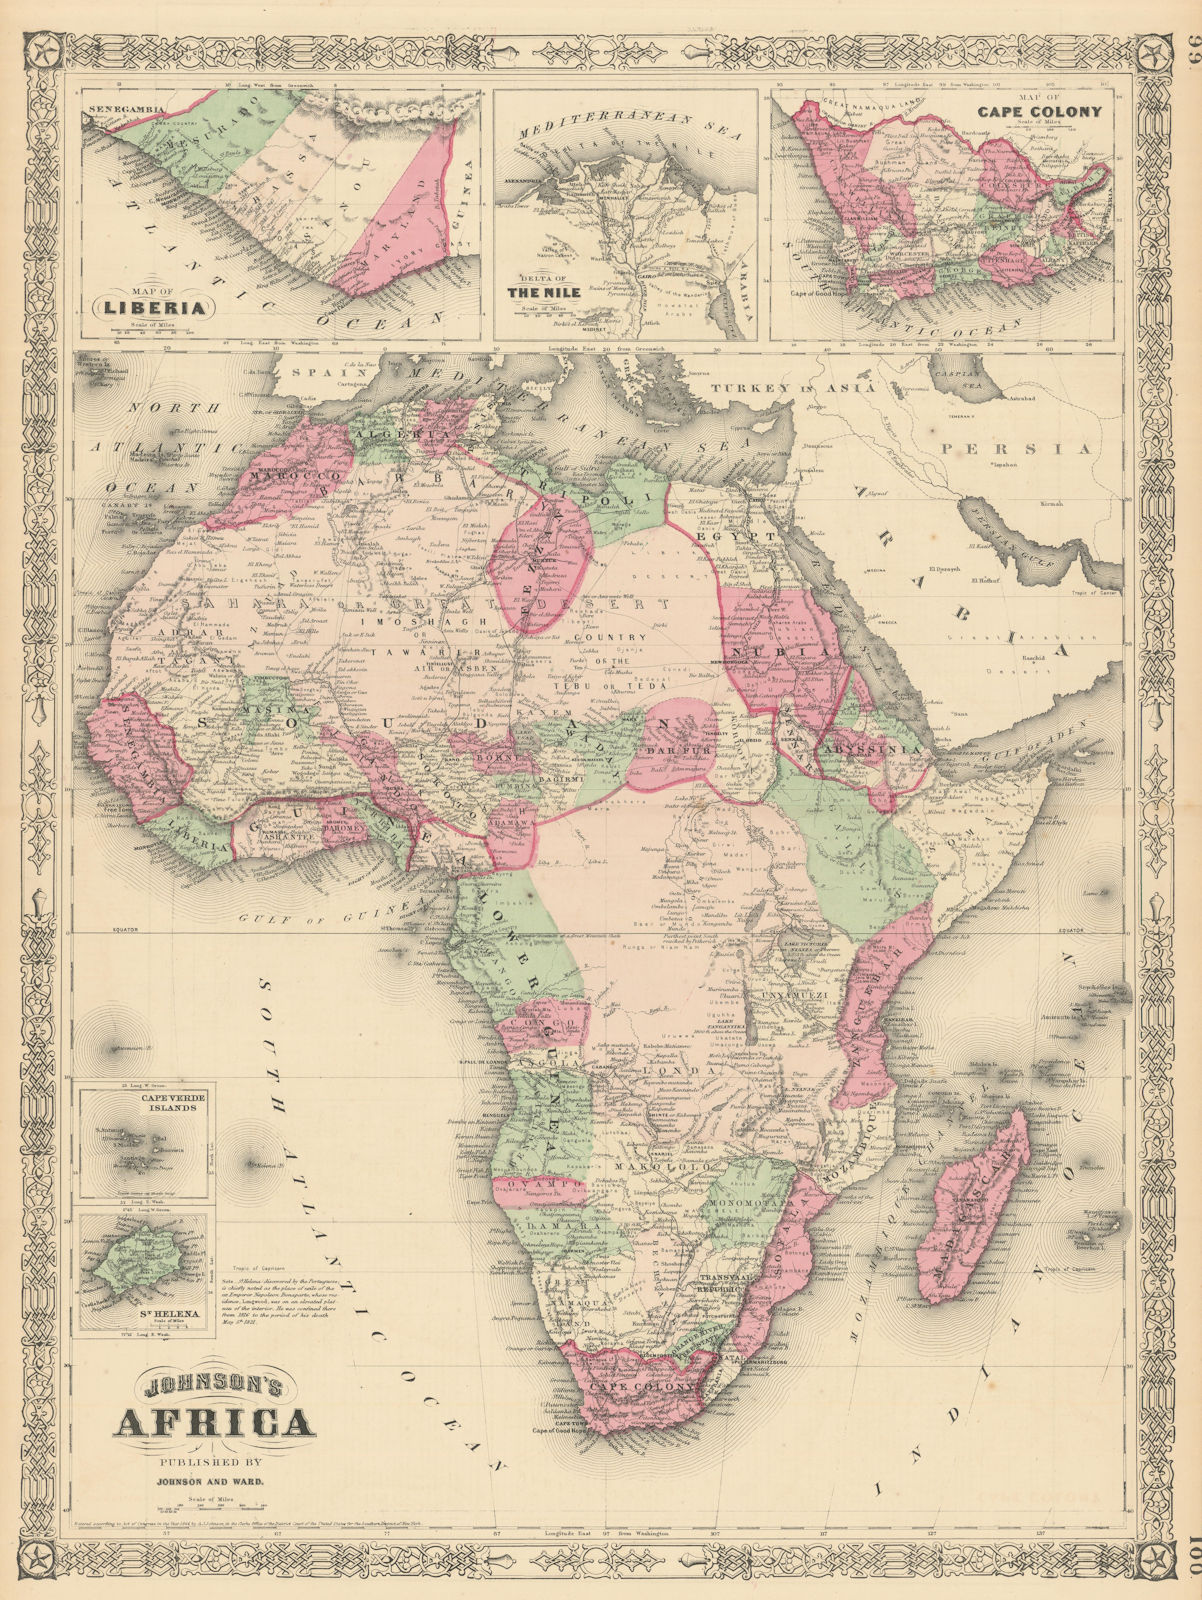 Associate Product Johnson's Africa. Colonies & tribes. Liberia Nile Delta Cape Colony 1866 map